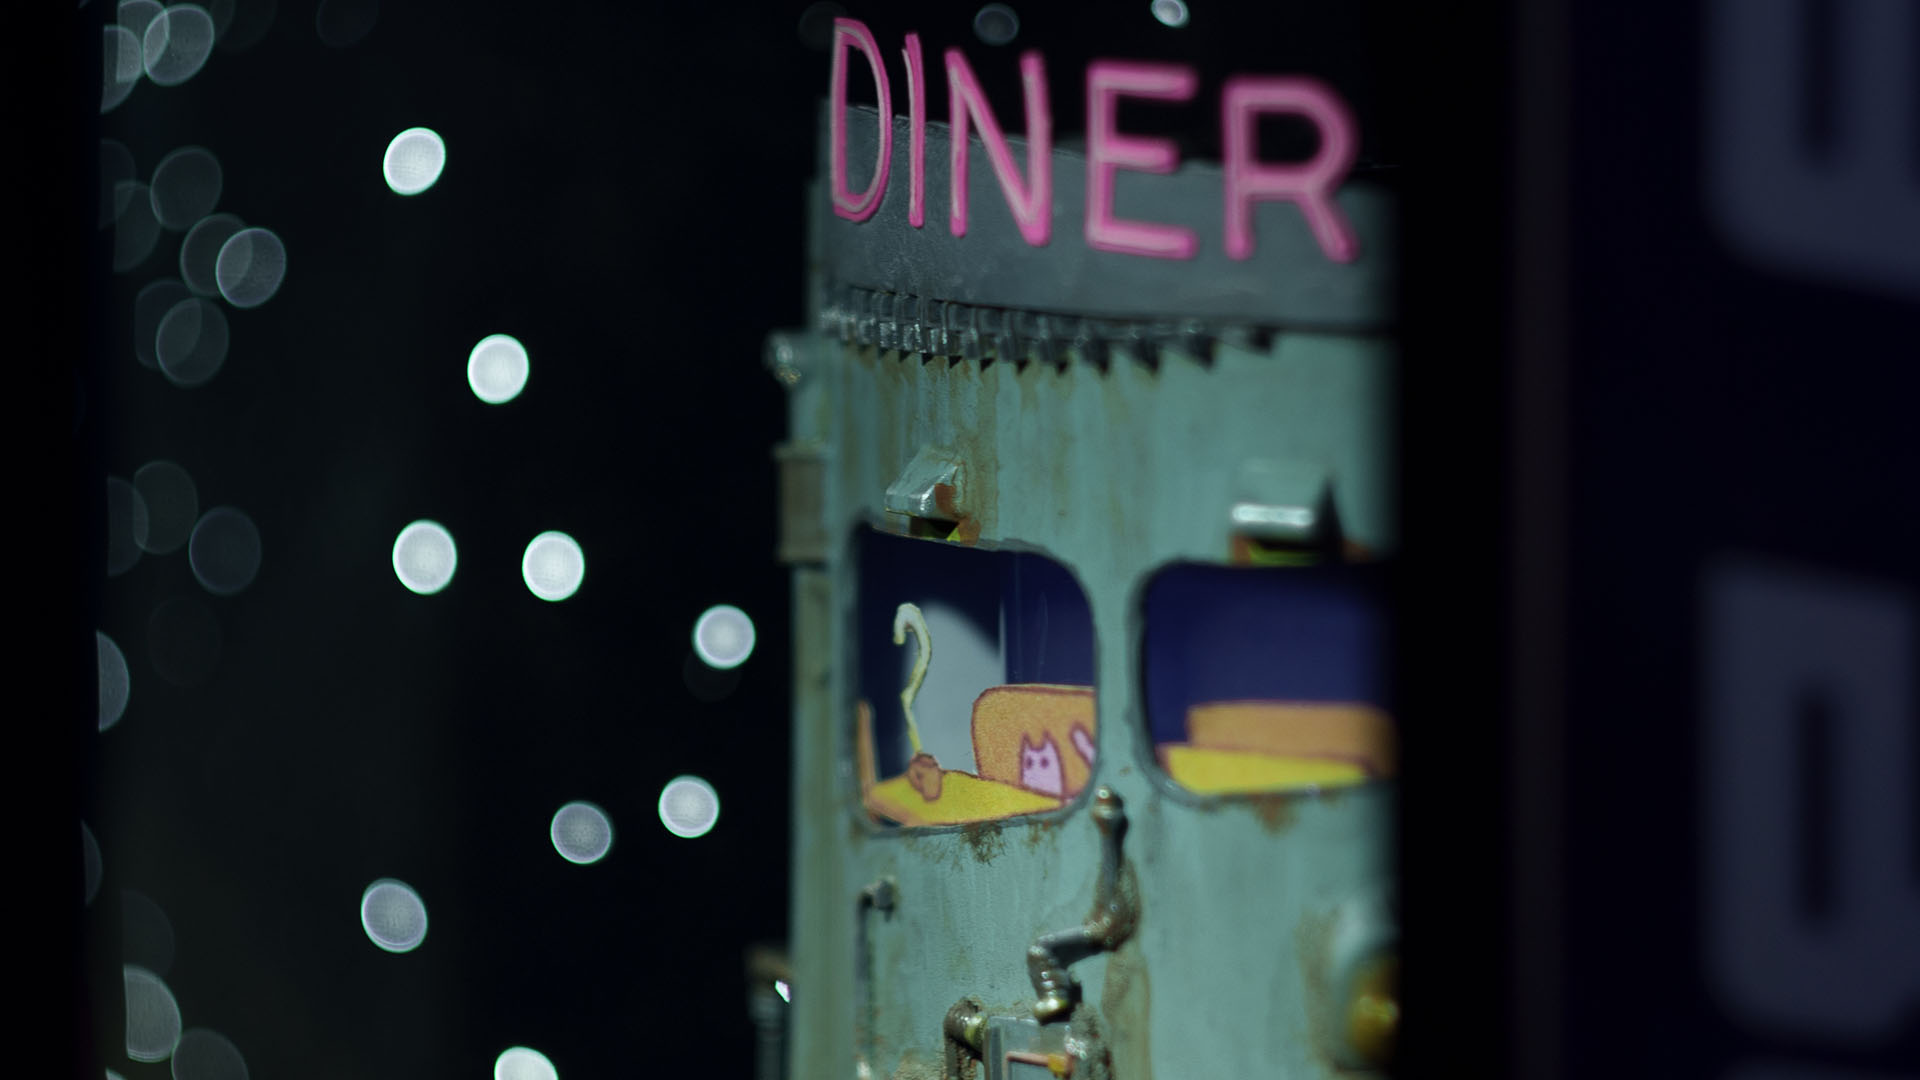 A close up of the case, focussing on a rusted looking sci-fi diner